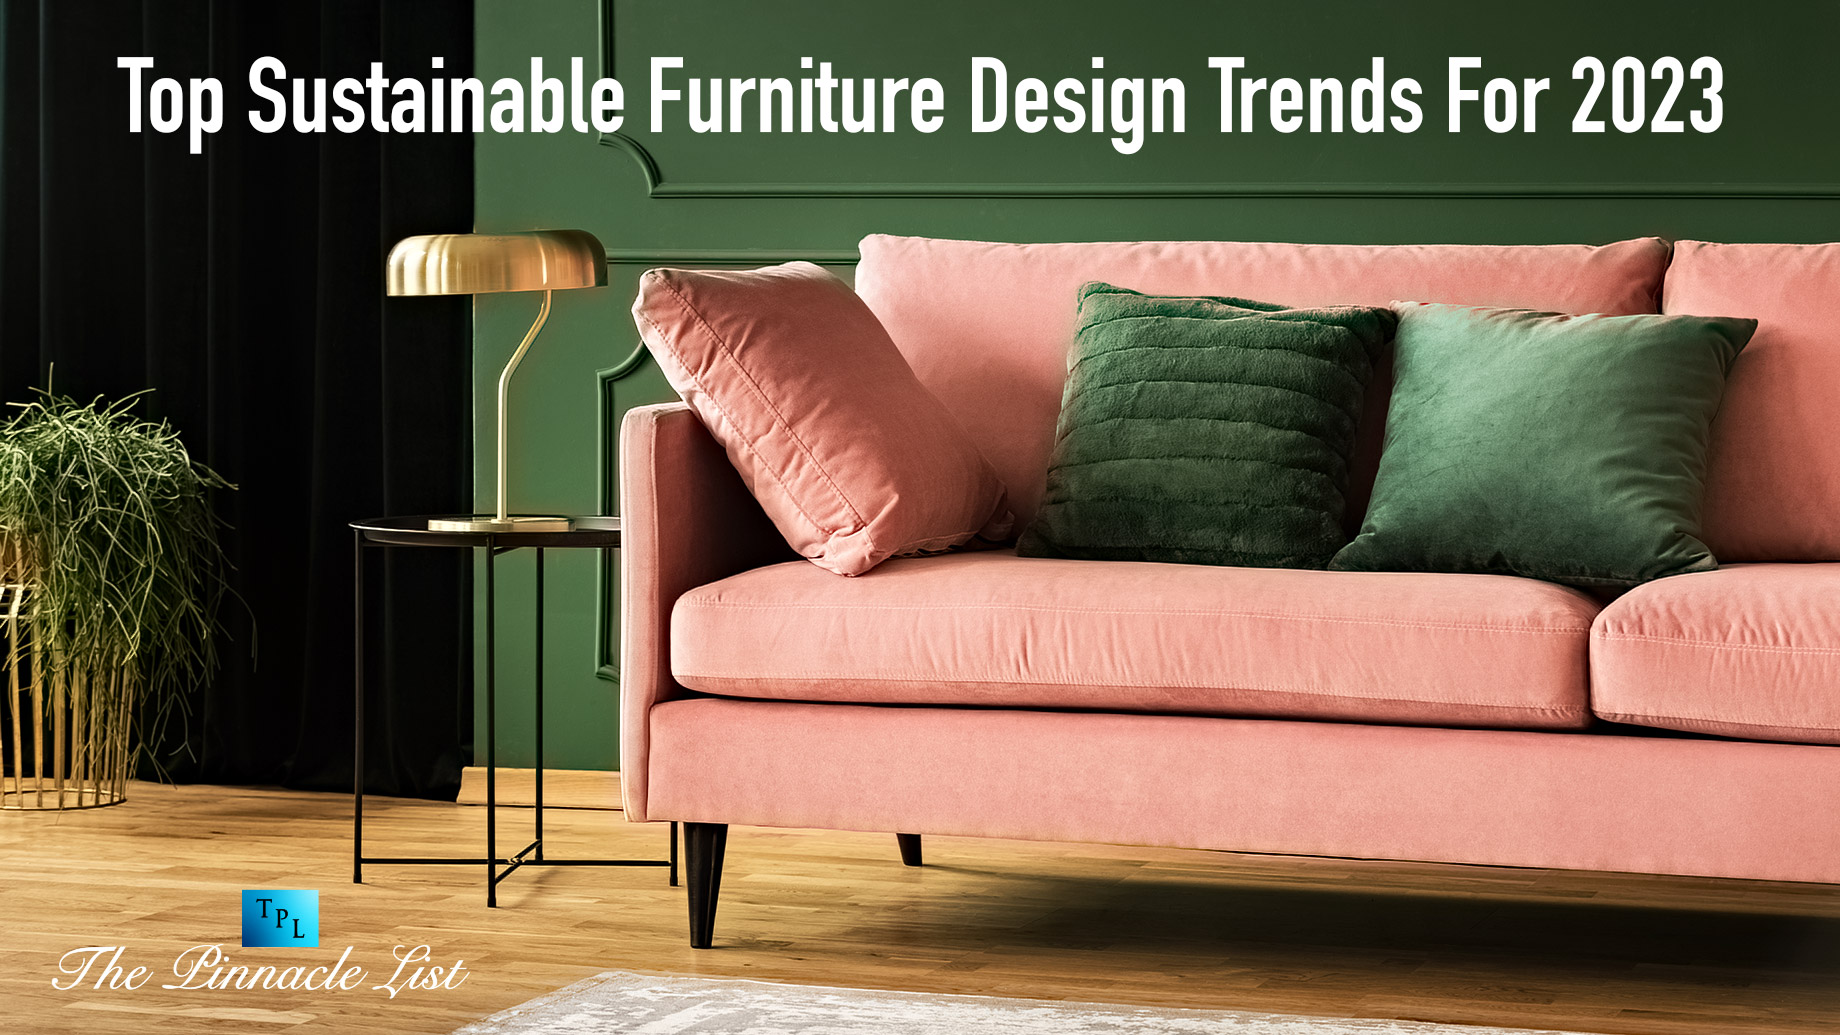 Top Sustainable Furniture Design Trends For 2023